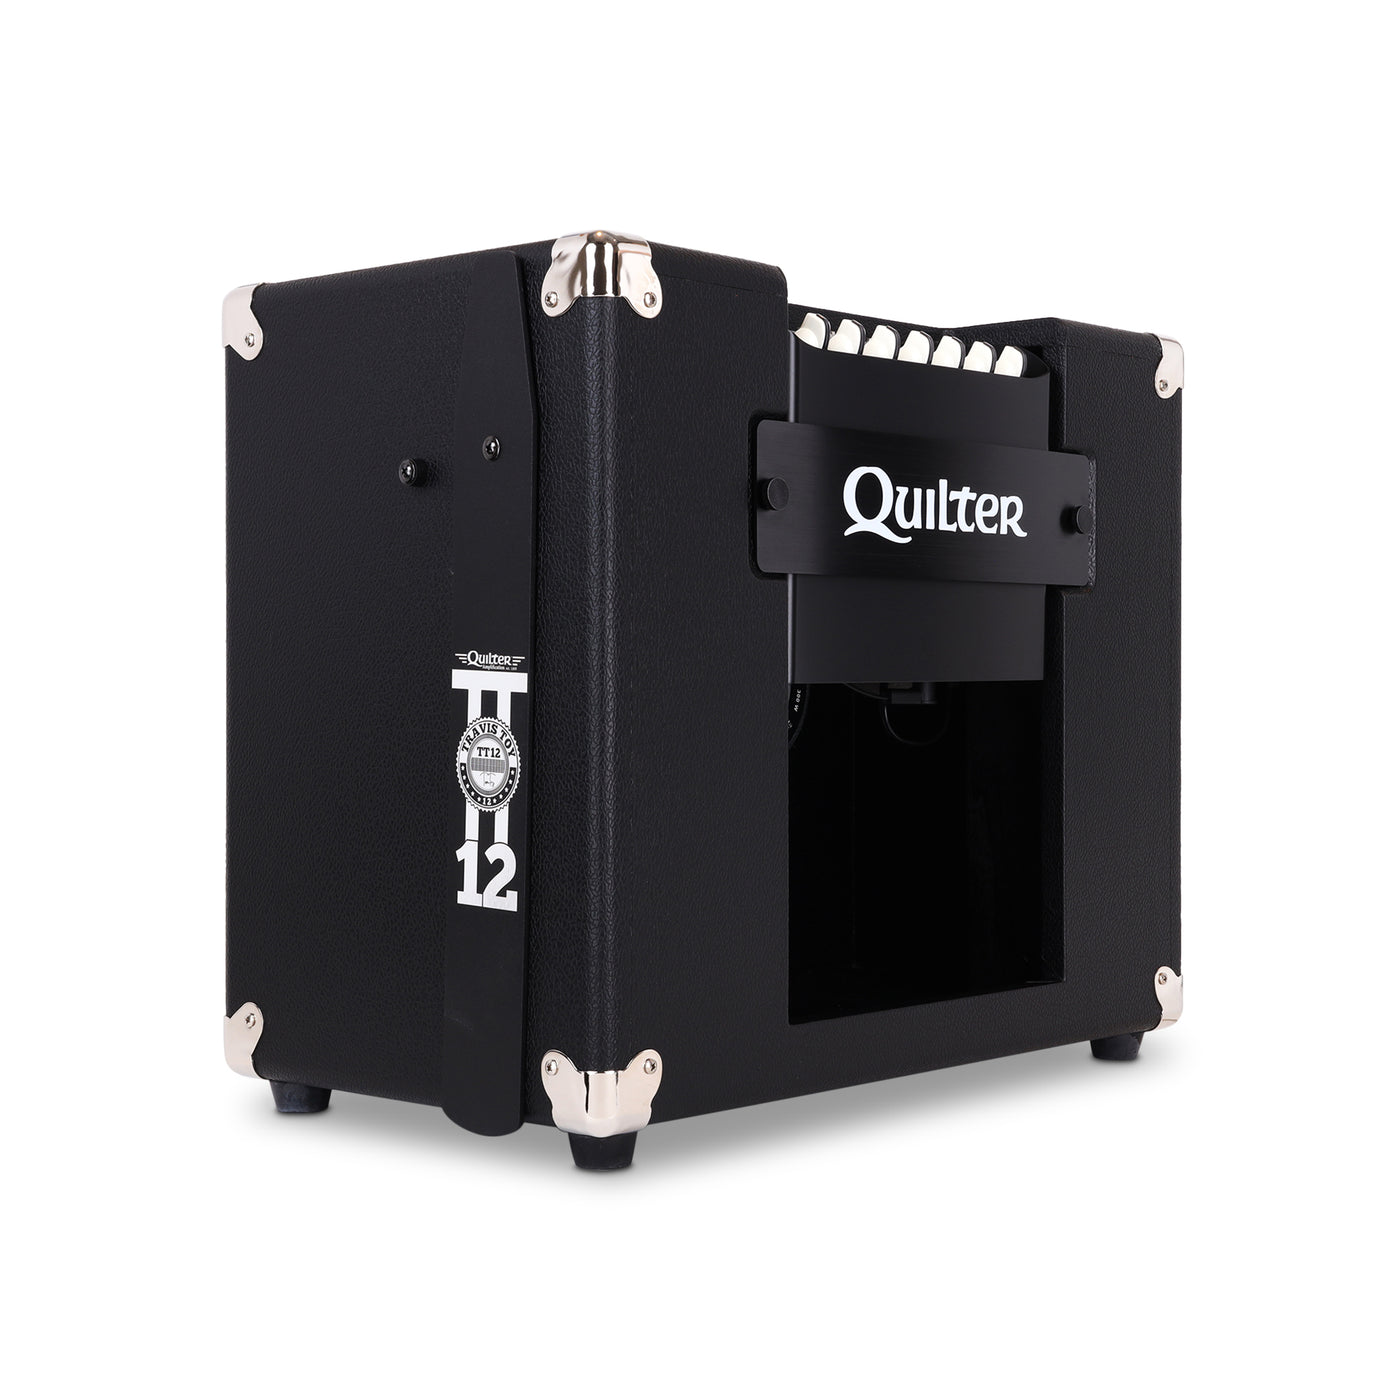 Quilter Labs Travis Toy 12 amplifier - facing diagonally away to the left